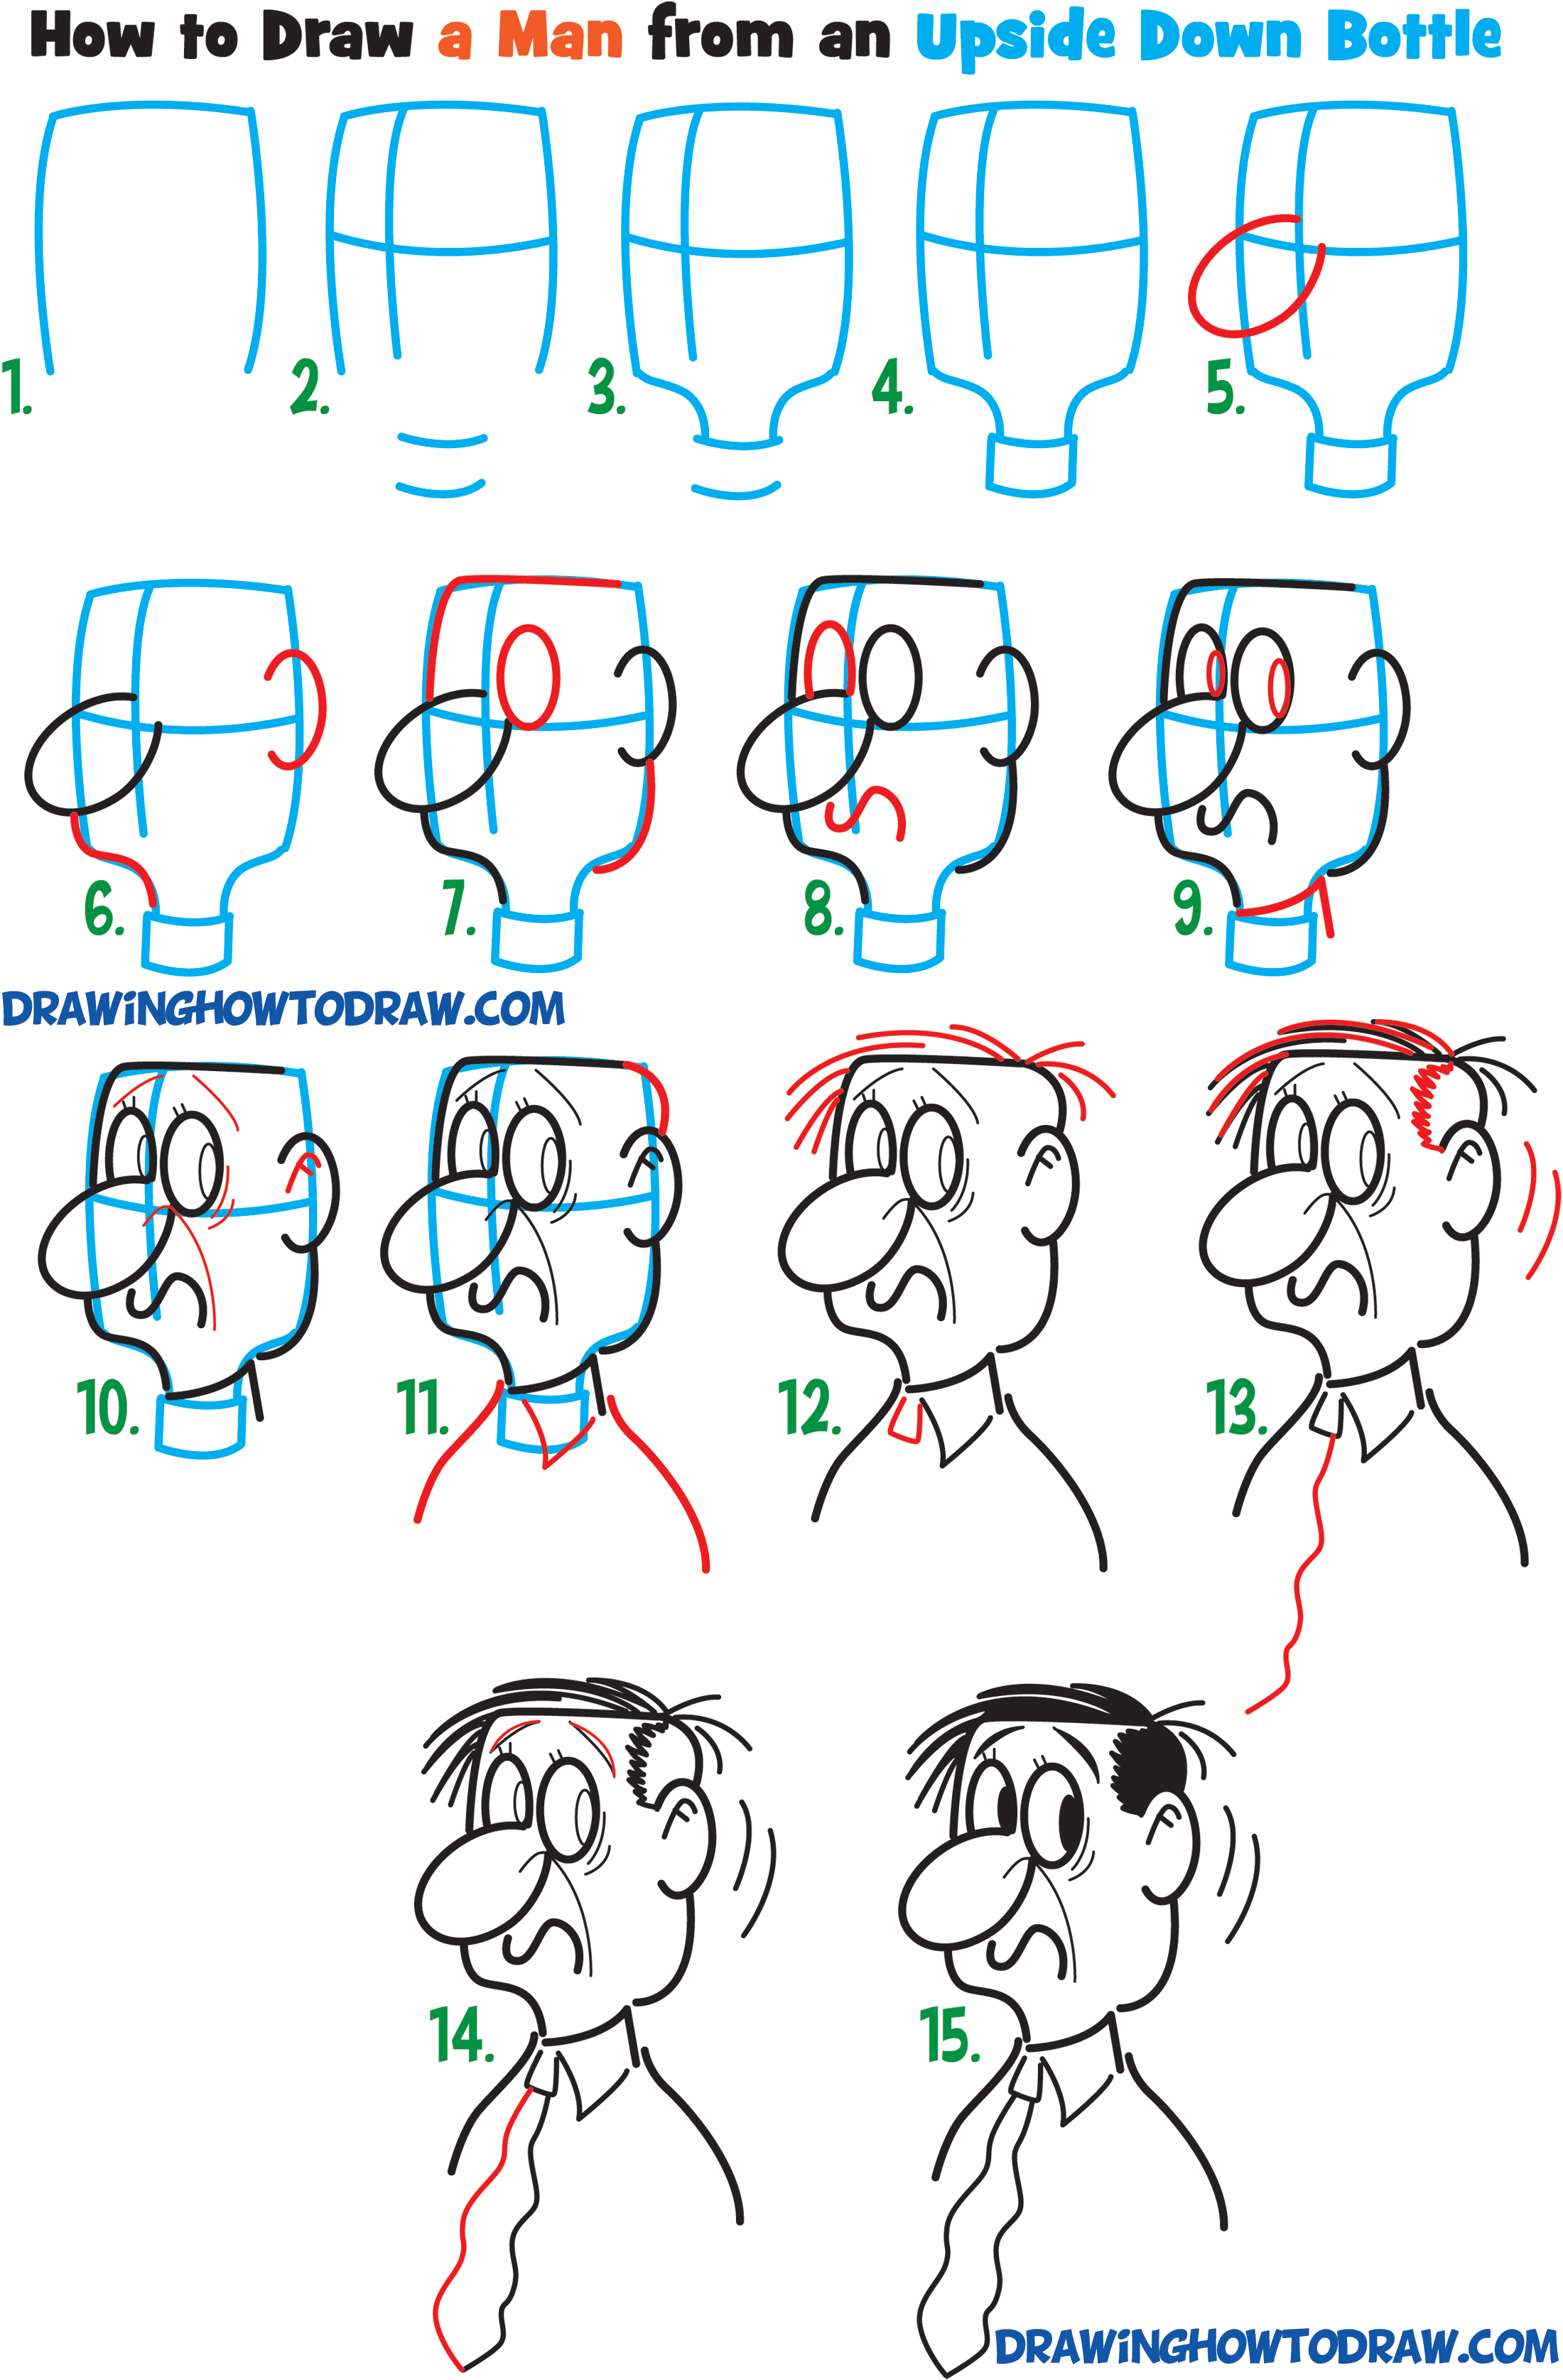 Tutorial #5: Draw a Cartoon Man's Face from the Side / Profile View from an Upside Down Bottle